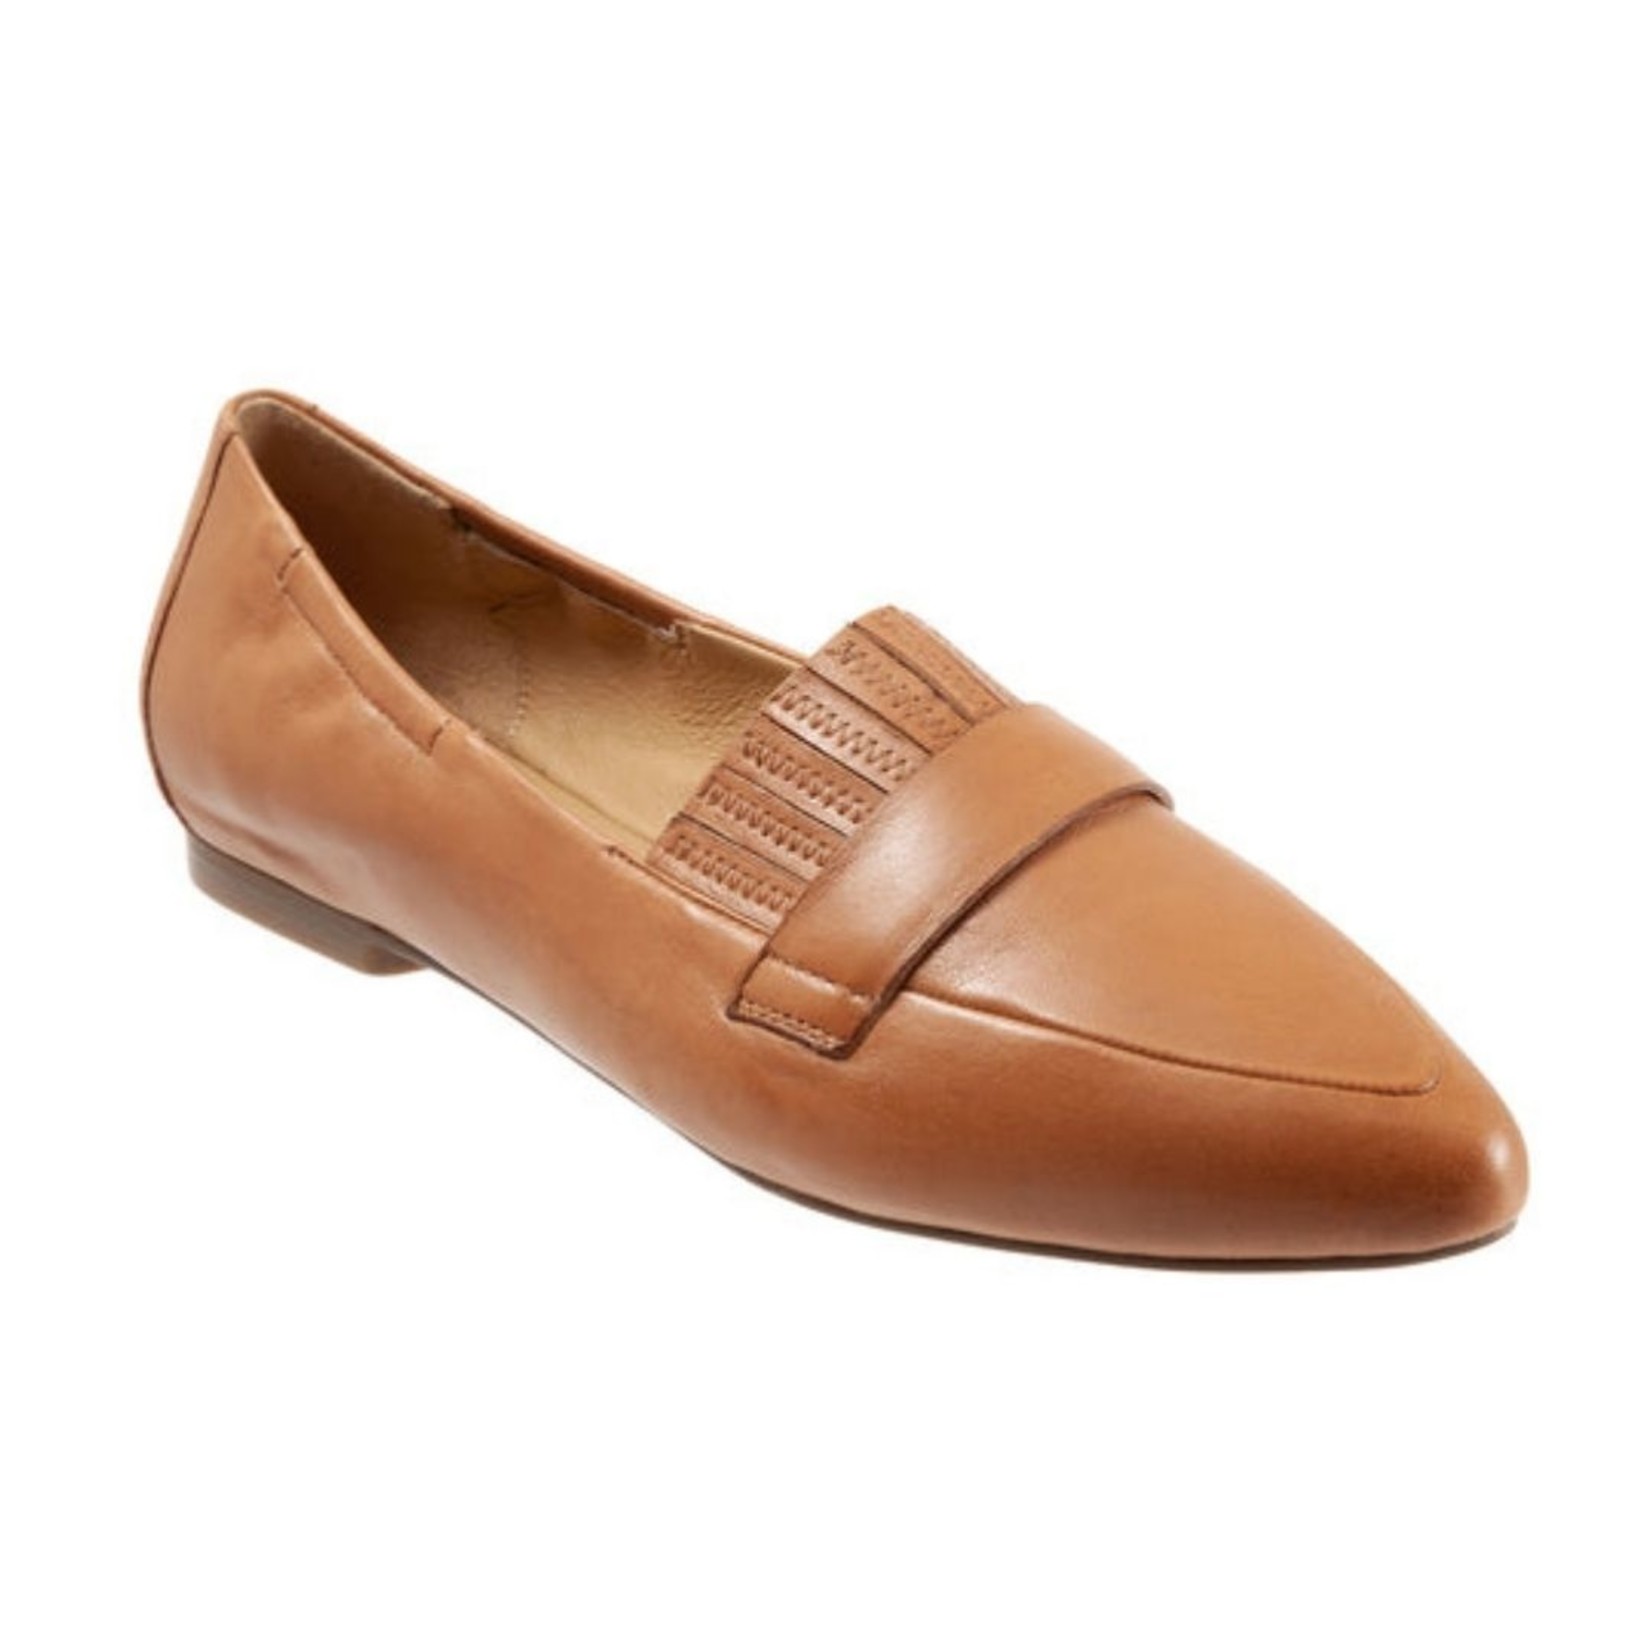 Trotters Trotters Emotion Women's Slip-On Shoes